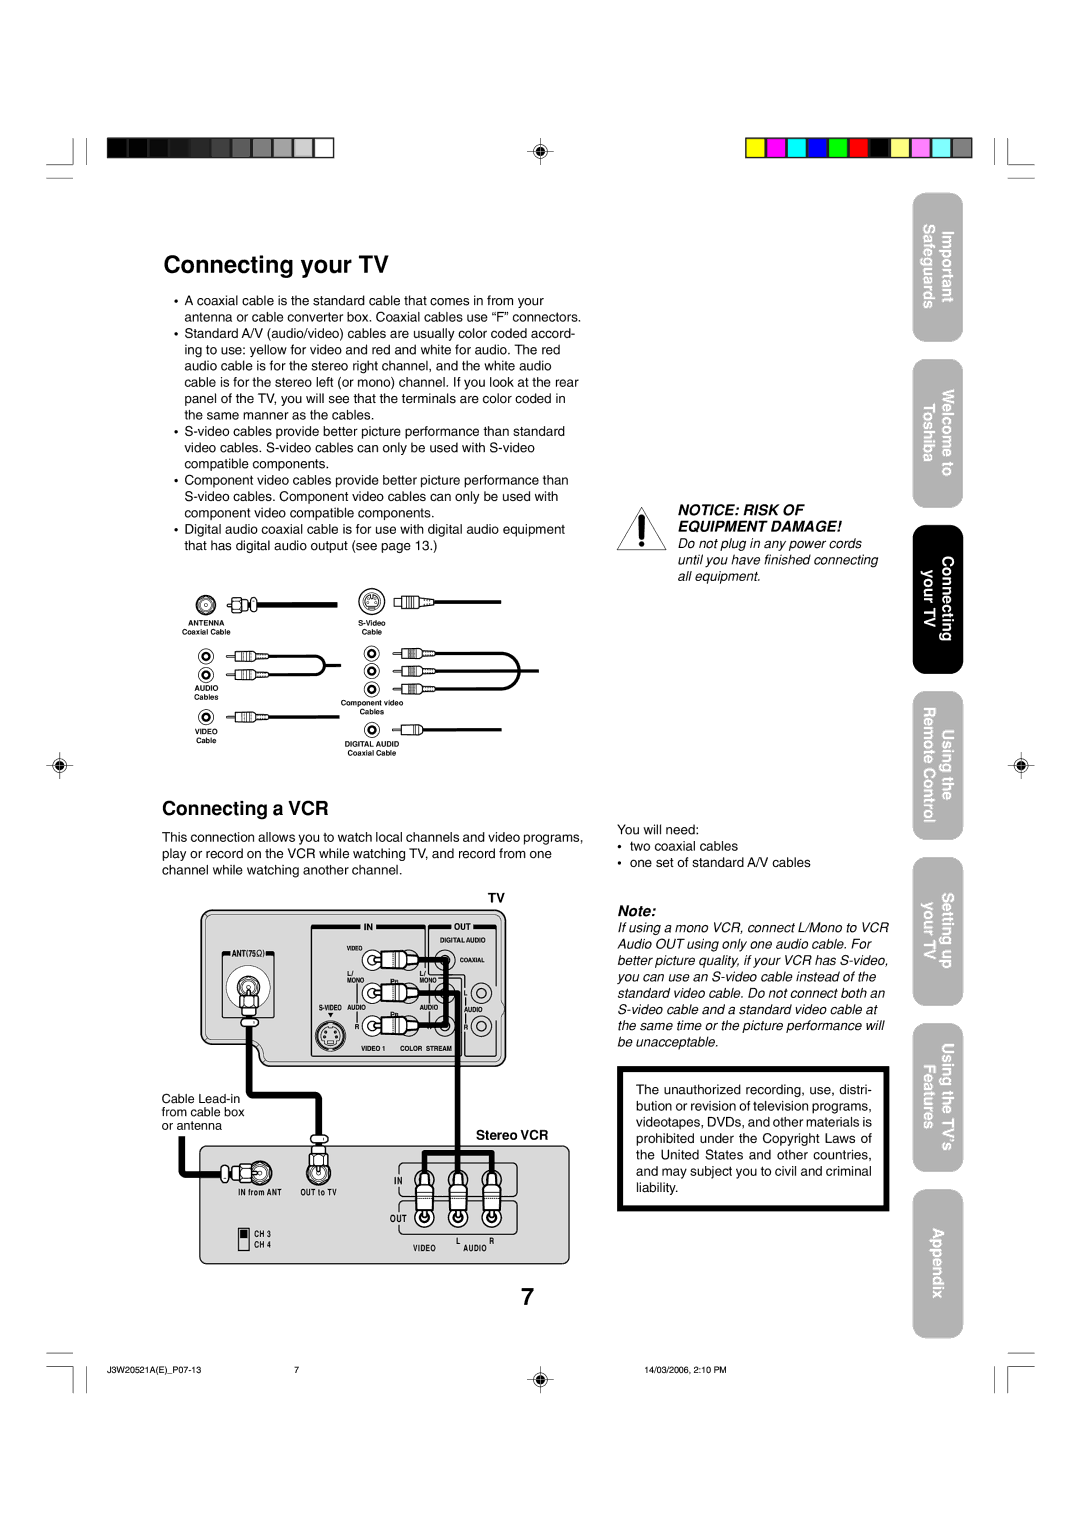 Toshiba 27DF46 appendix Connecting your TV, Connecting a VCR, Stereo VCR 